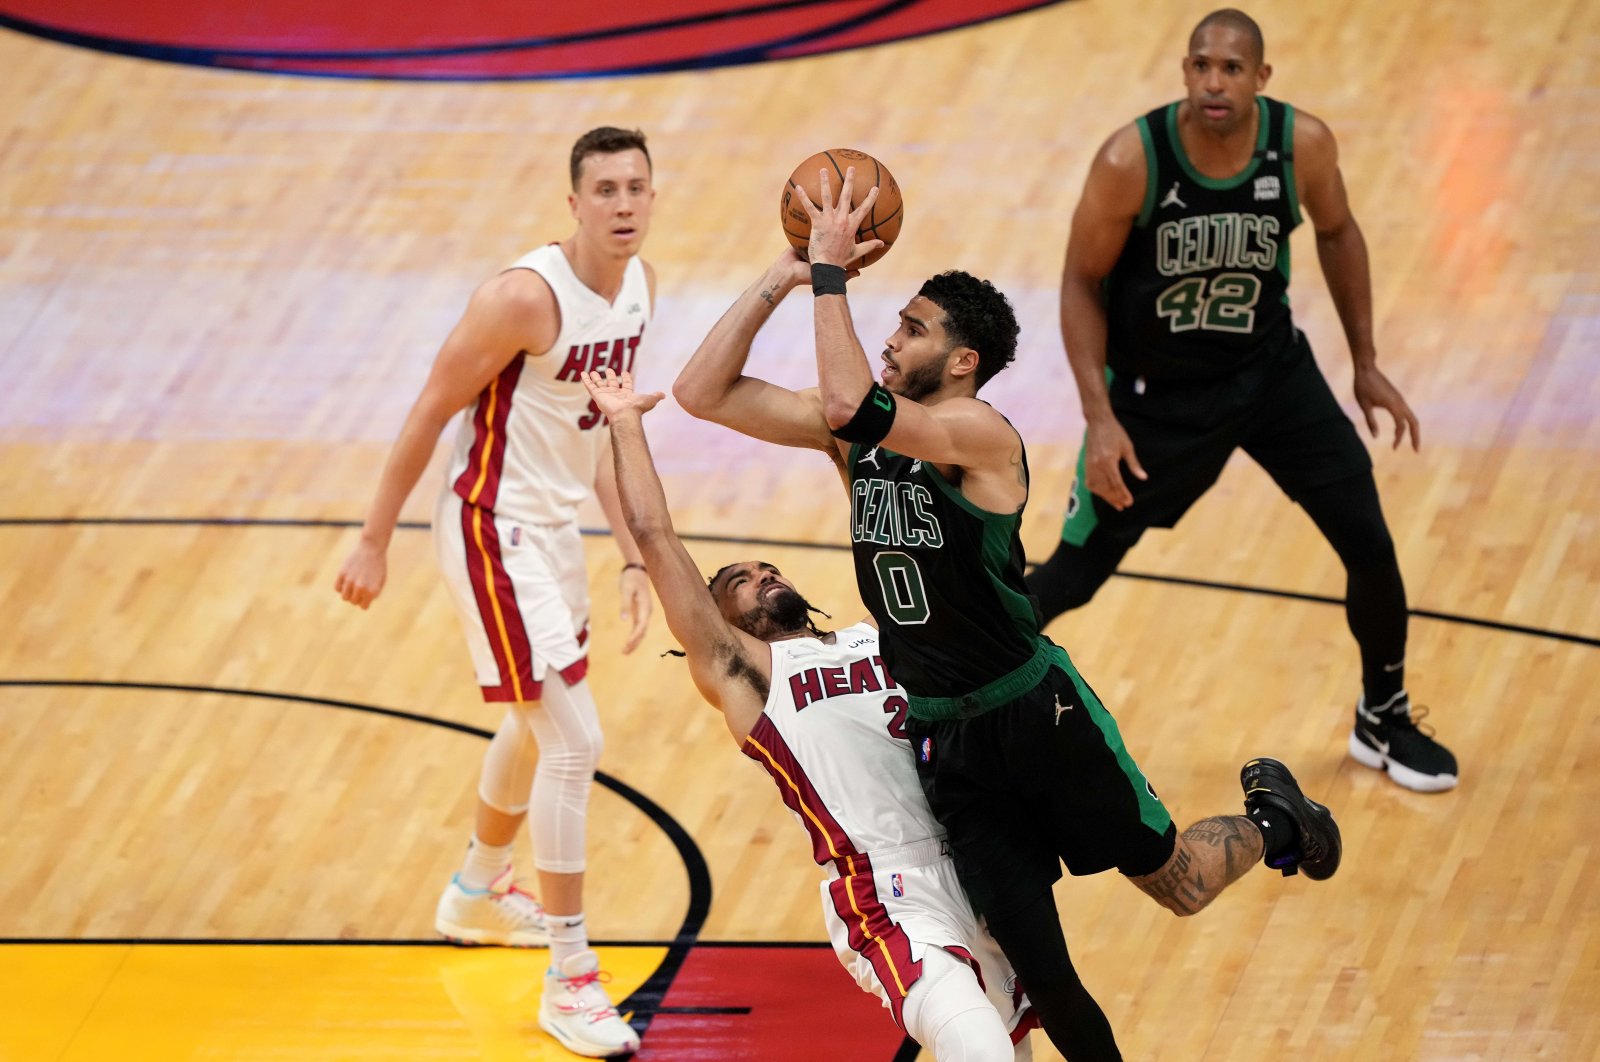 Celtics&#039; Jayson Tatum shoots against Heat&#039;s Gabe Vincent in Game 5 of the 2022 NBA Playoffs Eastern Conference Finals, Miami, Florida, May 25, 2022. (AFP Photo)